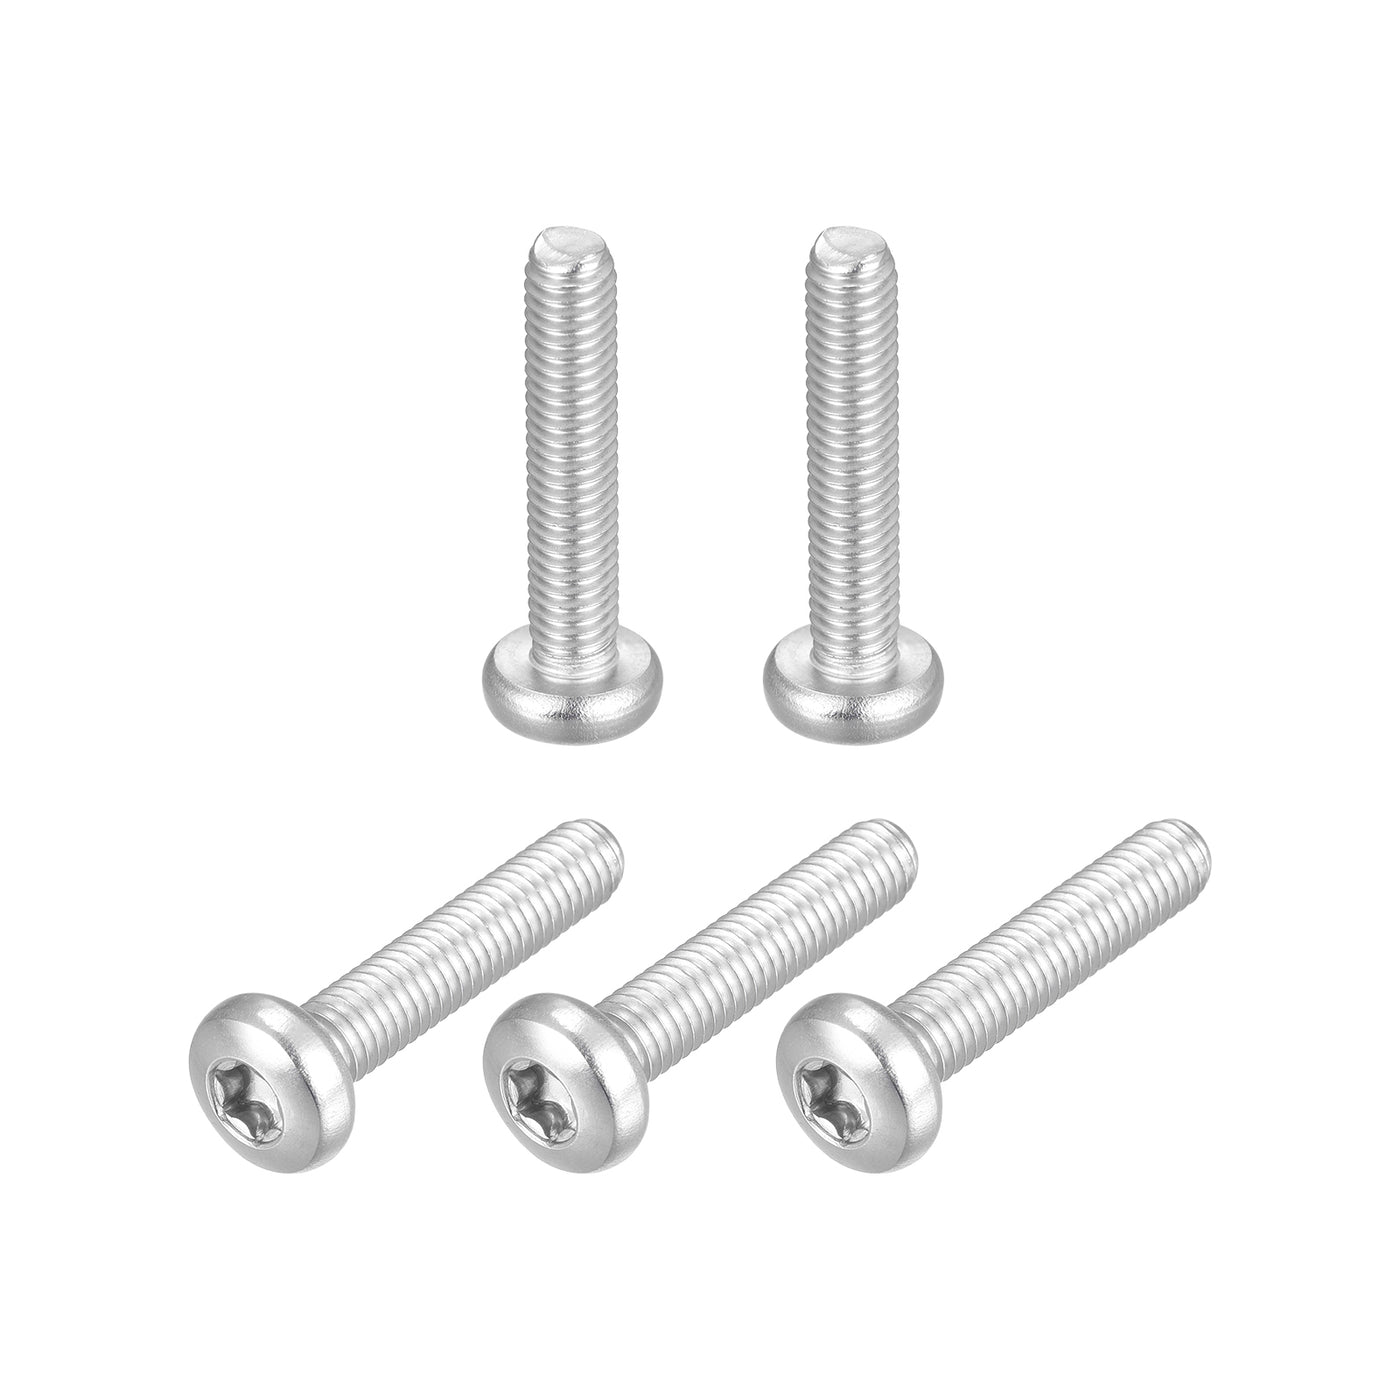 uxcell Uxcell M6x30mm Torx Security Machine Screws, 5pcs 316 Stainless Steel Pan Head Screw